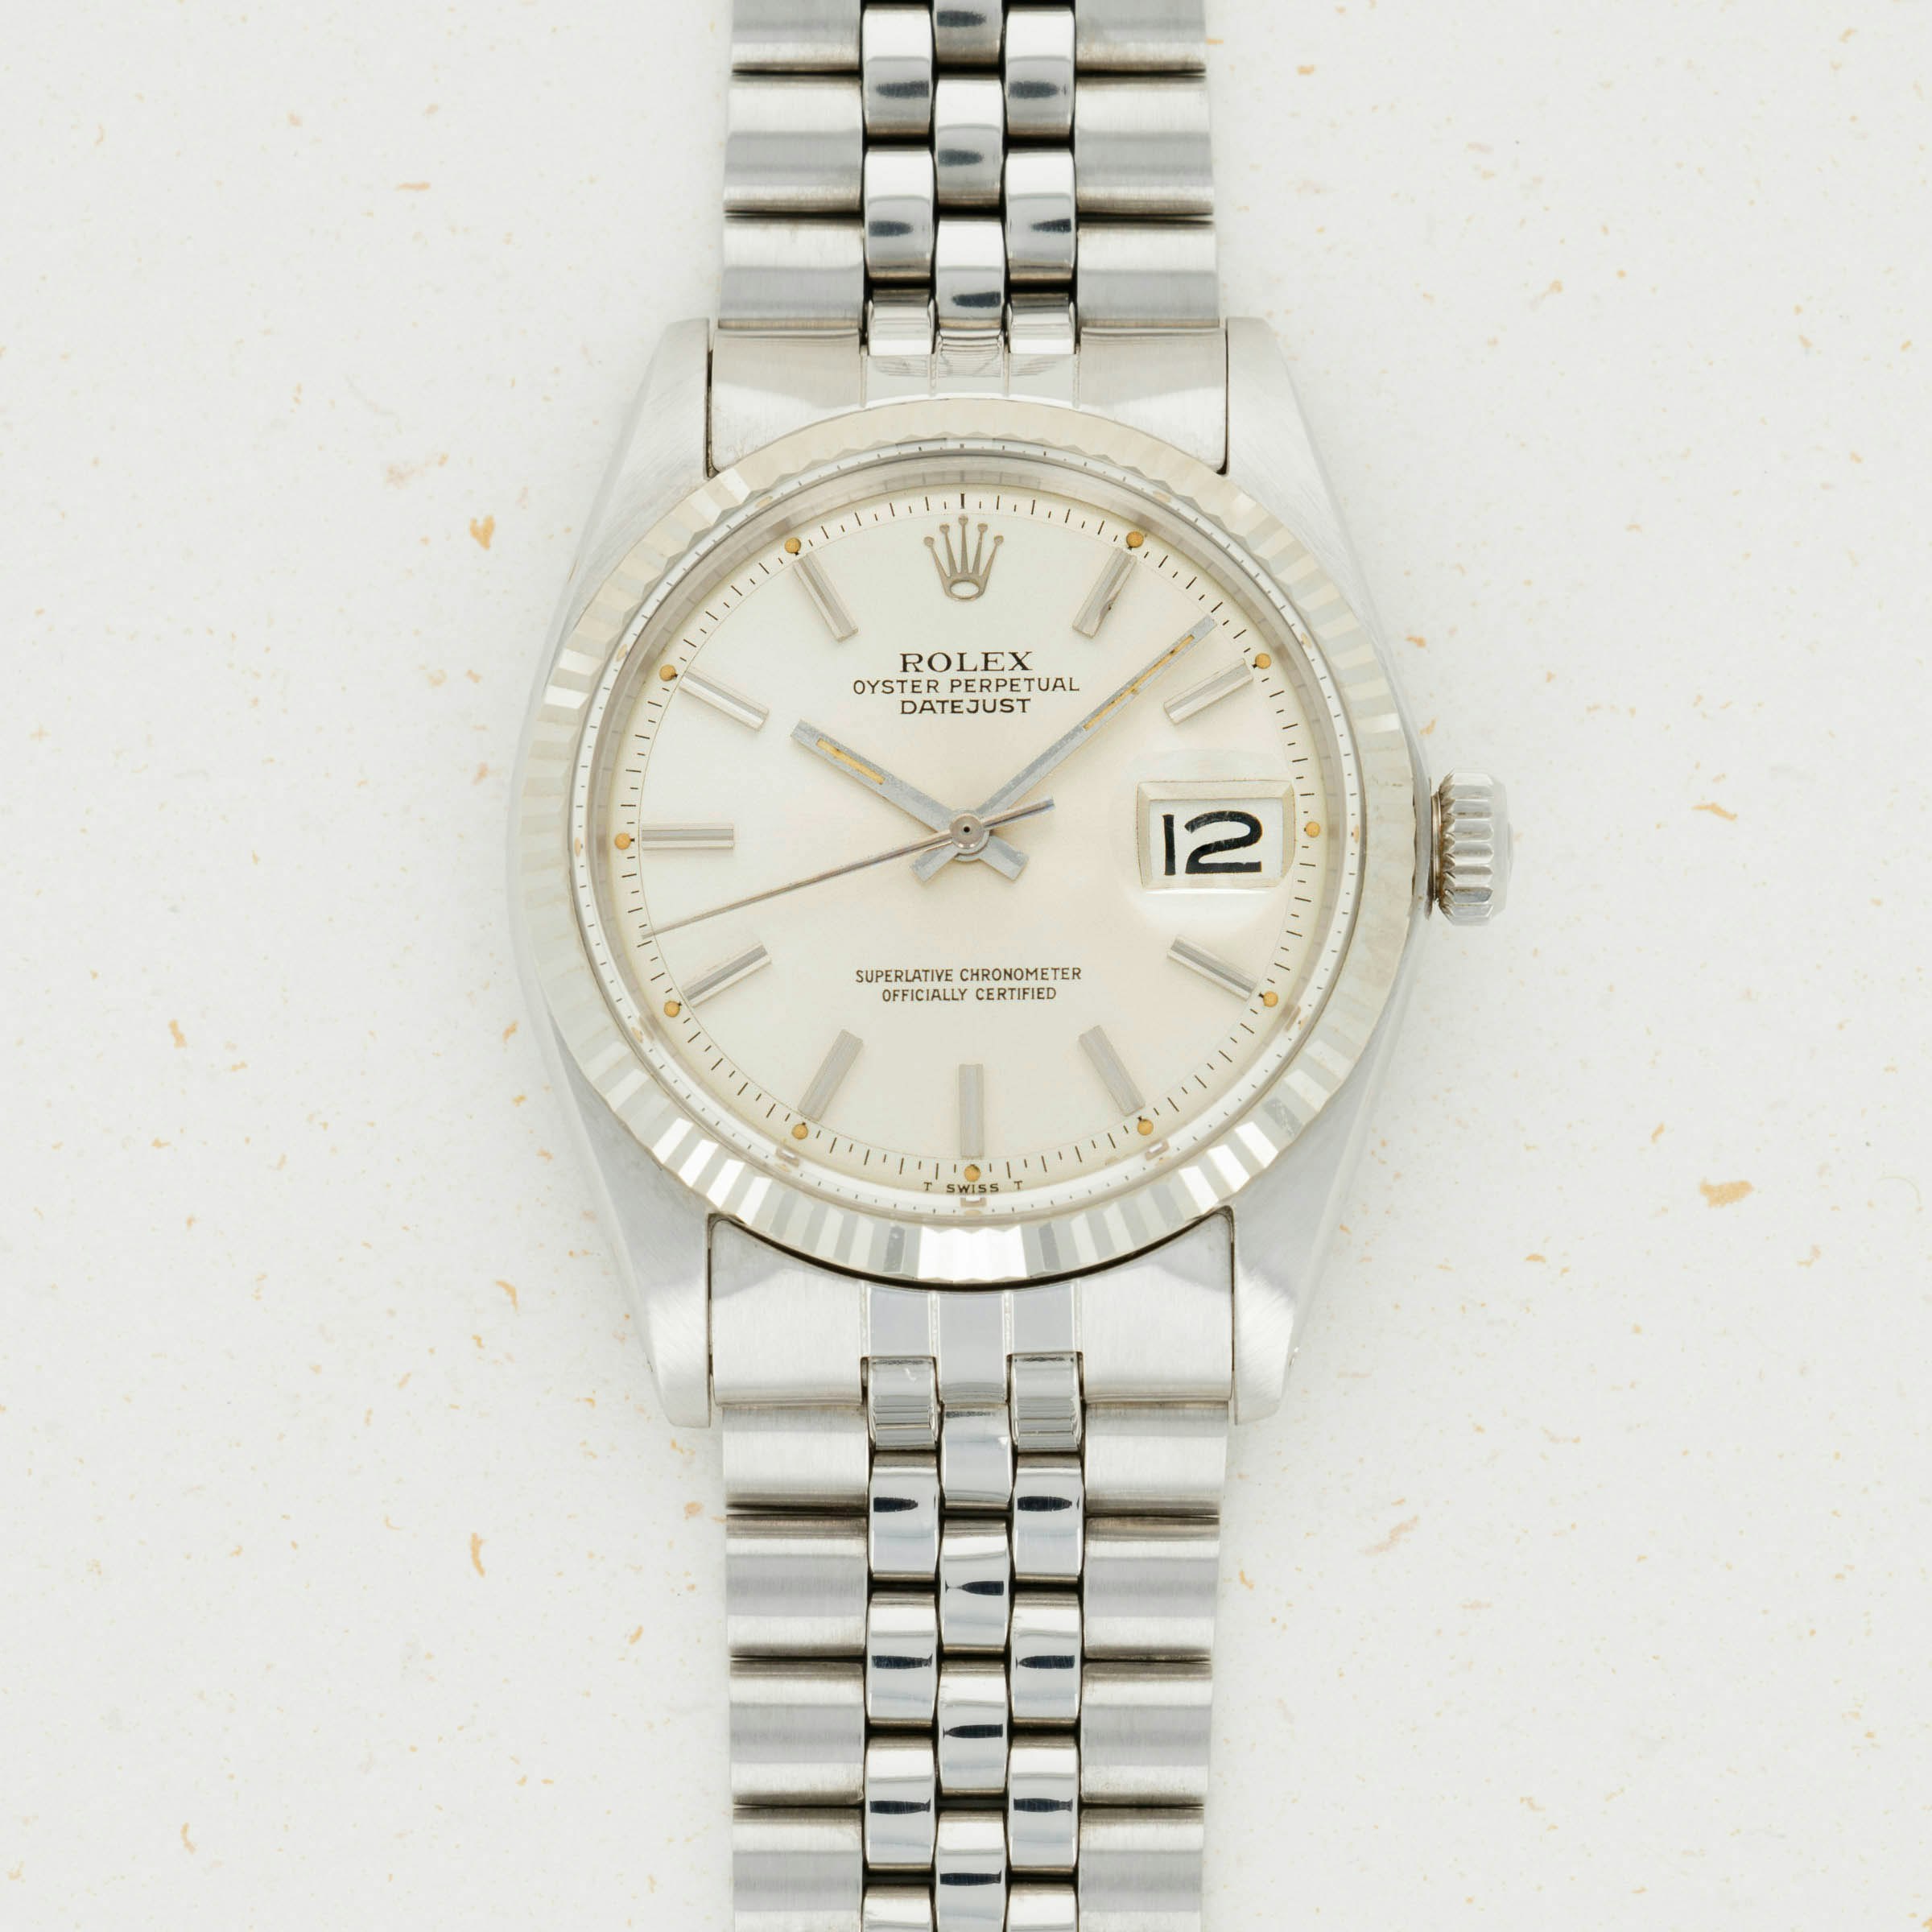 Thumbnail for Rolex Datejust 1601 NOS with Papers